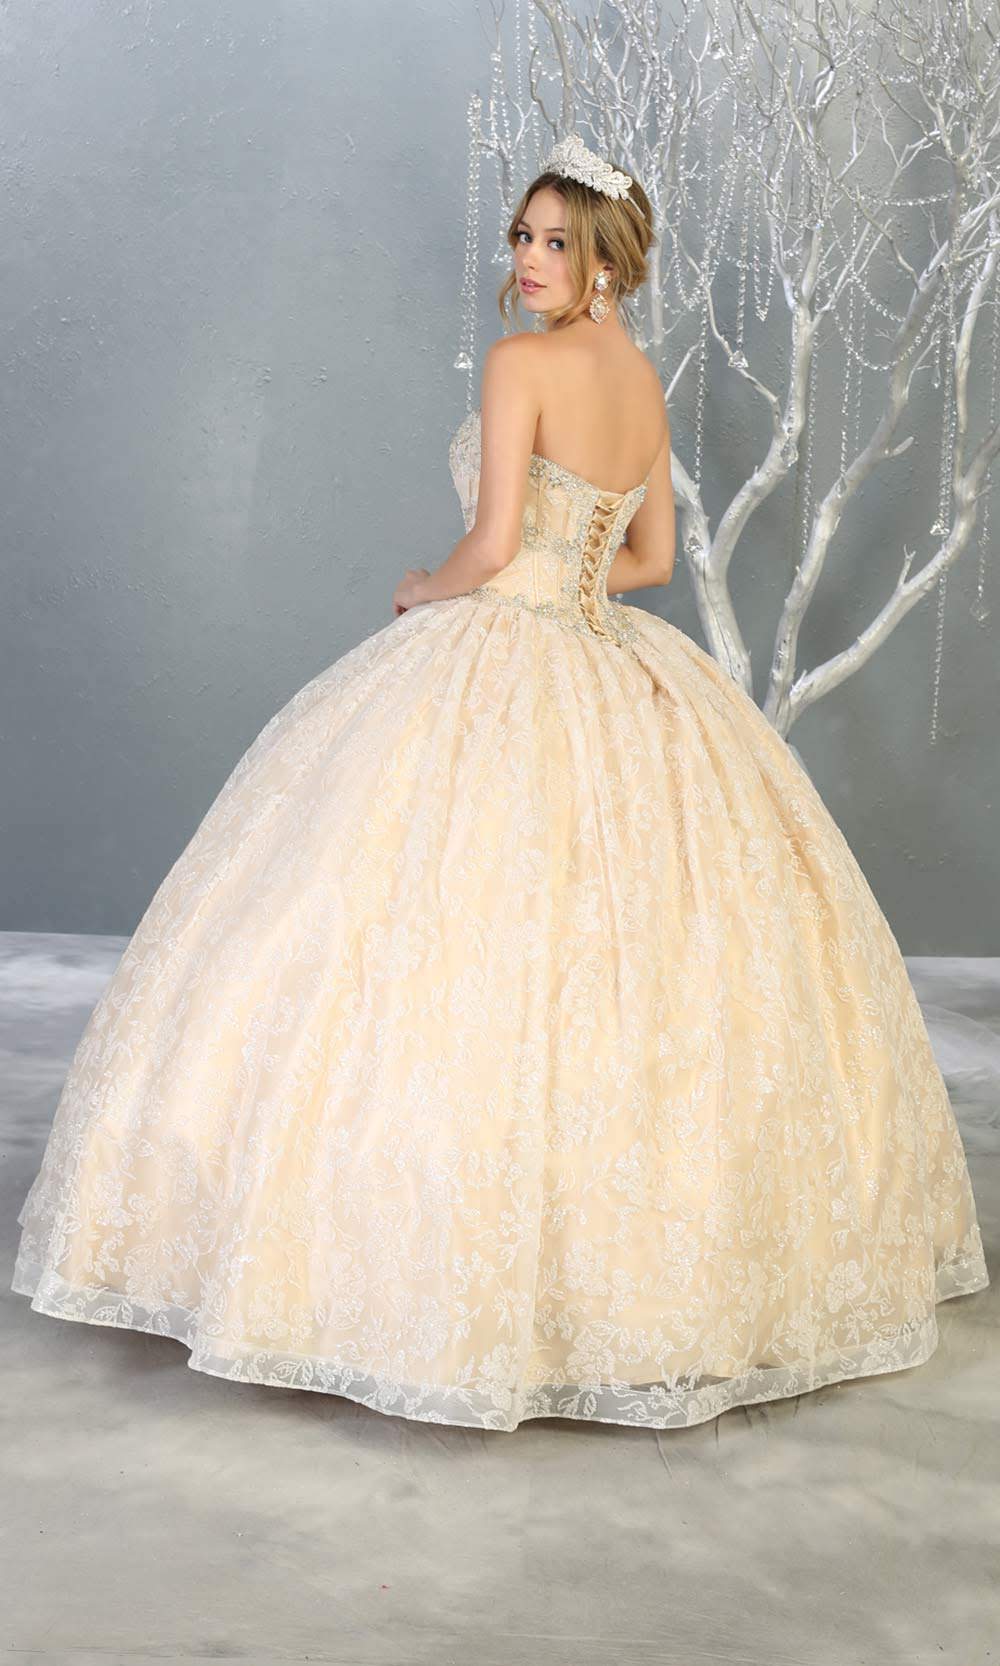 Mayqueen LK144 ivory nude quinceanera ball gown w/ lace & beading. This ivory ball gown is perfect for bridal gown, engagement dress, wedding reception, indowestern party gown, sweet 16, debut, sweet 15. Plus sizes available for ballgowns-b